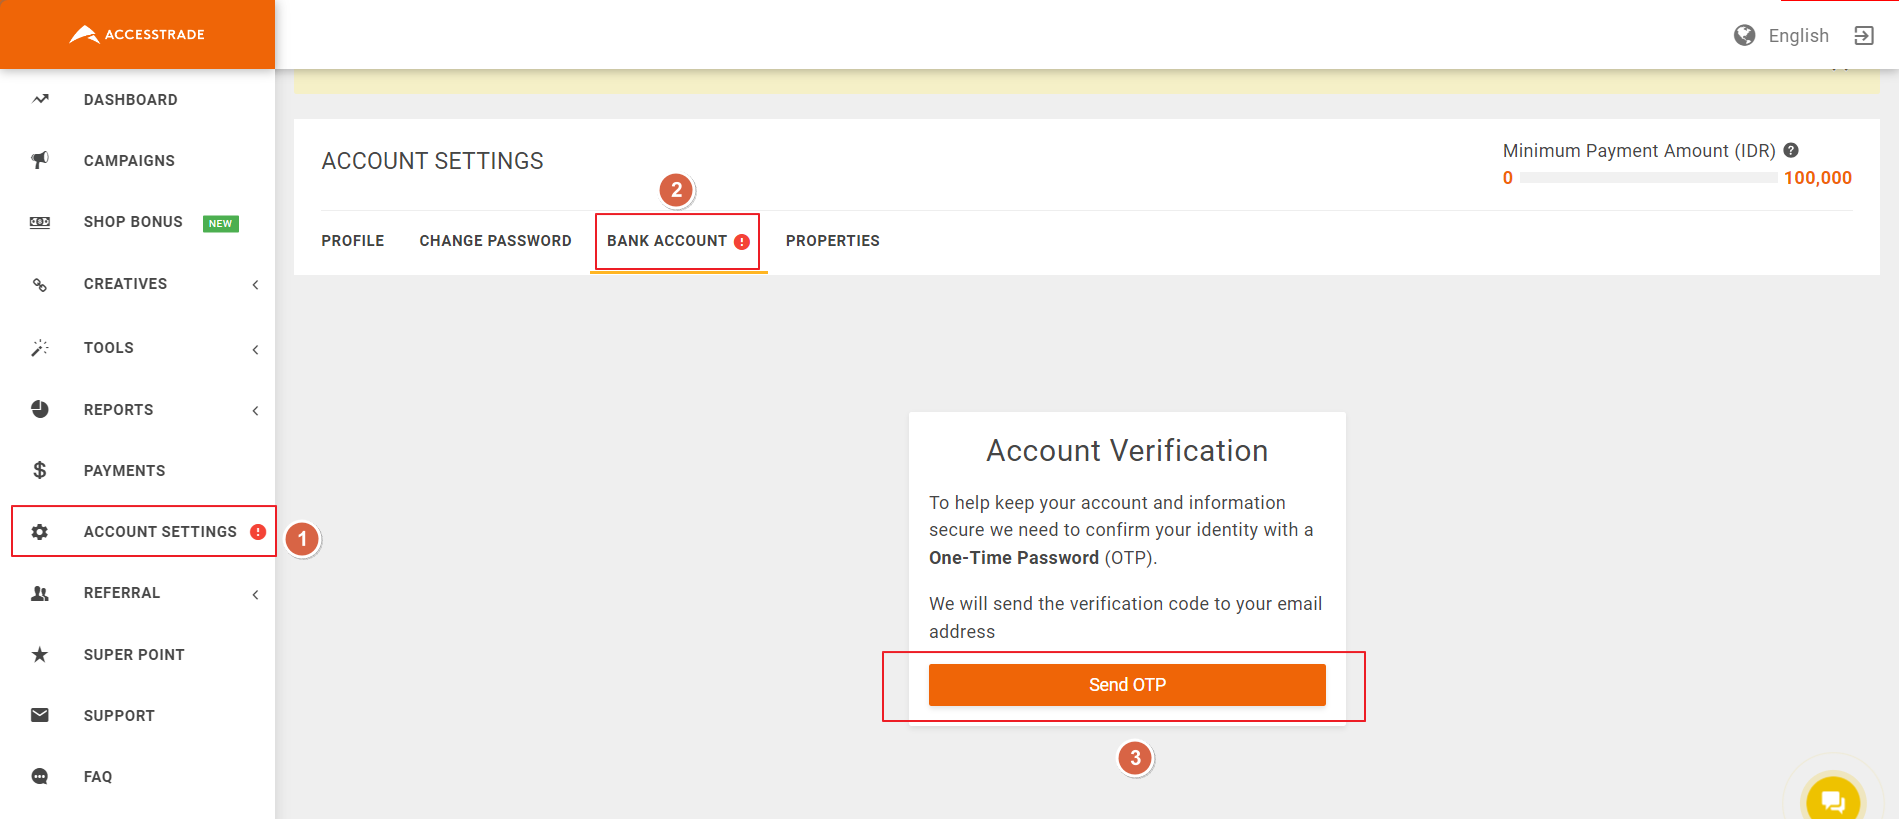 2nd-image-of-account-settings